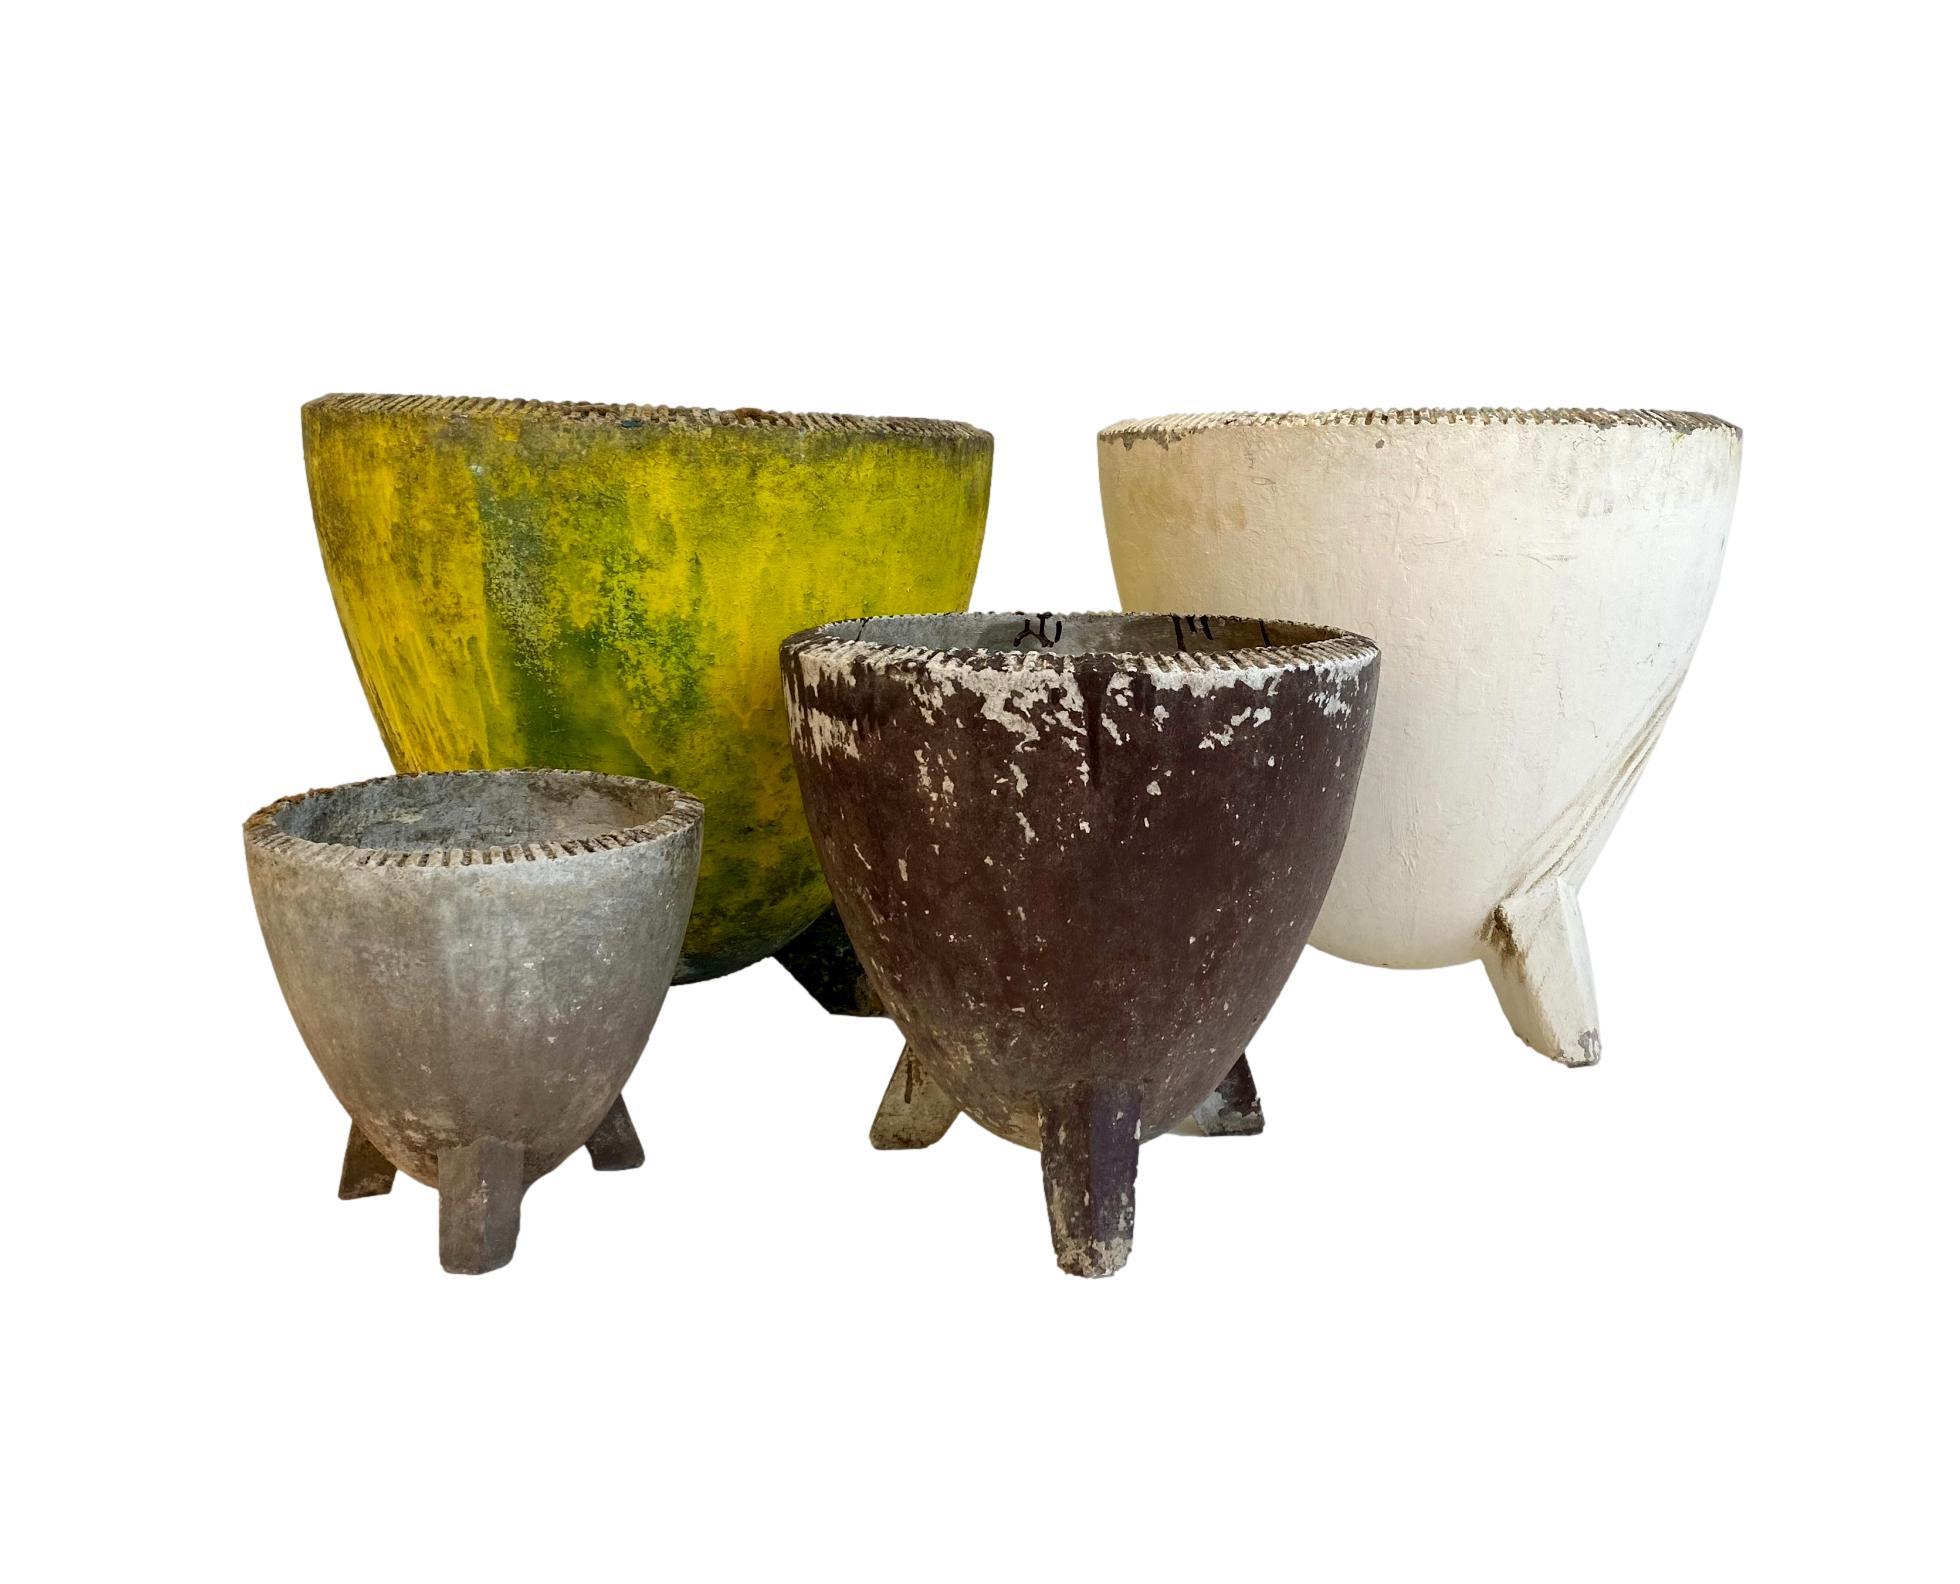 Gigantic concrete planters by Willy Guhl for Eternit. Heightened bowl with a three legged base. Teeth ridges along the upper rim. Great patina and condition. Factory markings. Super unique shape. Four available. Priced individually. 

   